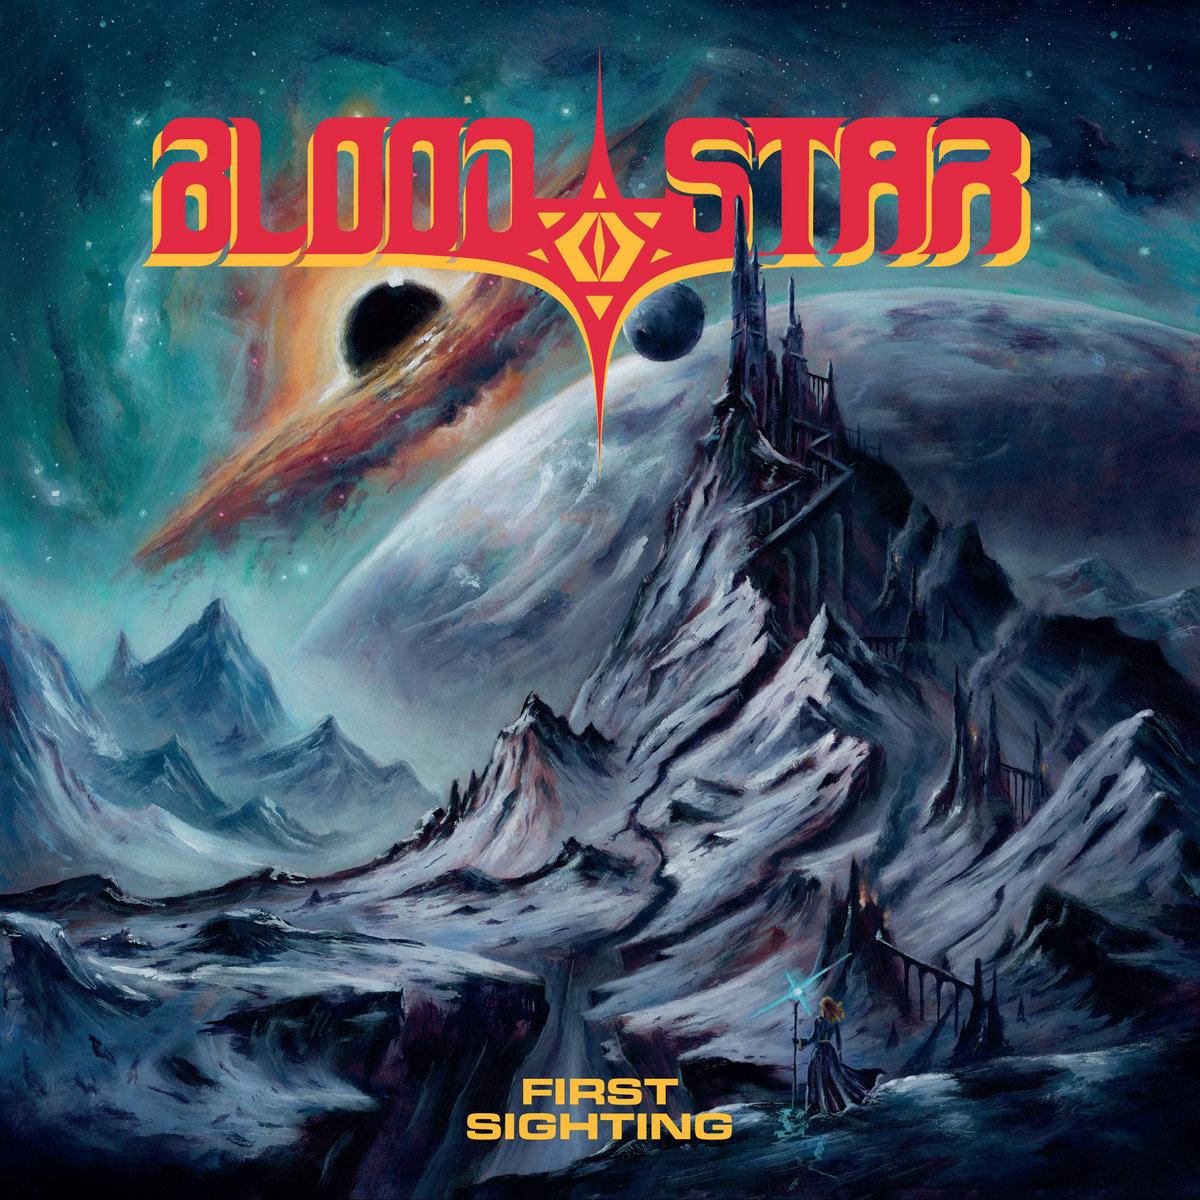 BLOOD-STAR-First-Sighting-Cover.jpg